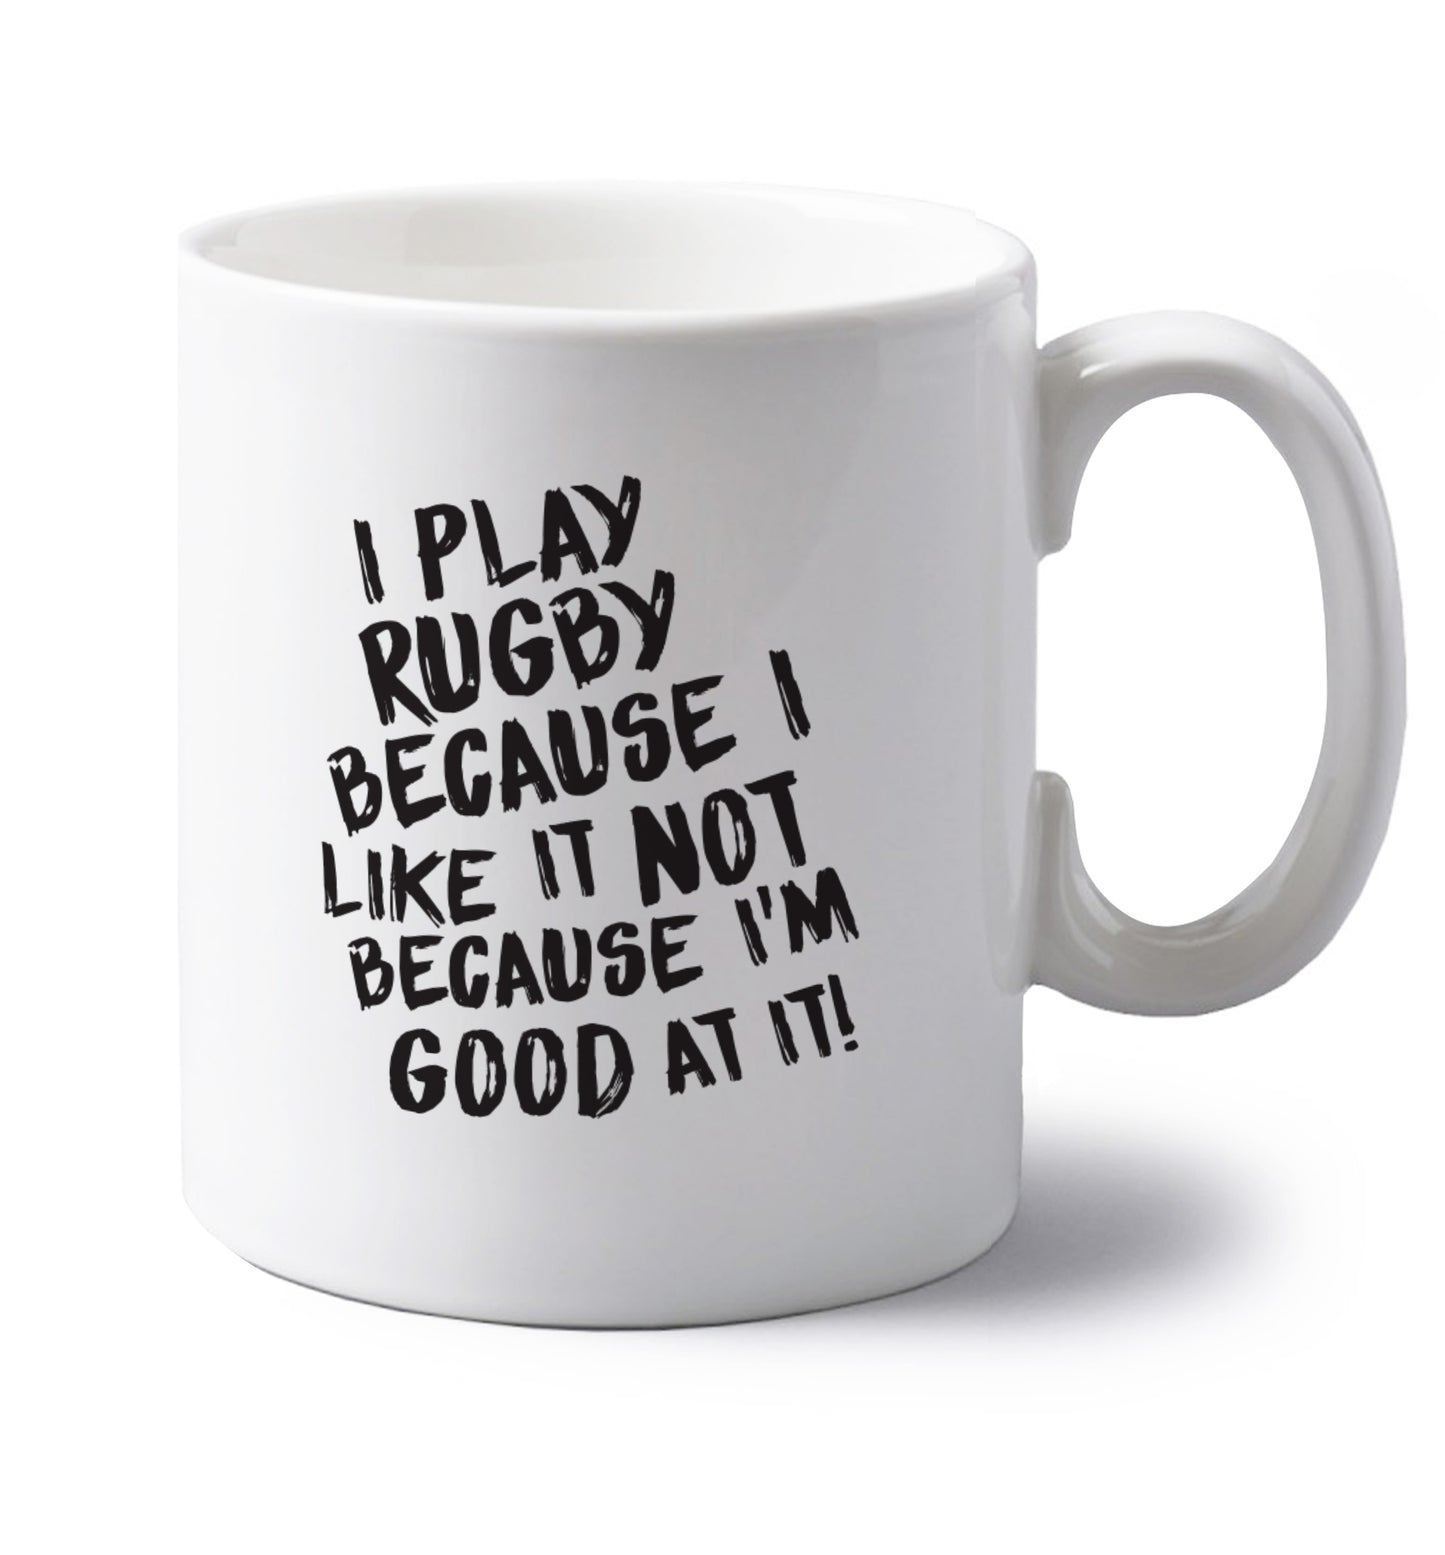 I play rugby because I like it not because I'm good at it left handed white ceramic mug 